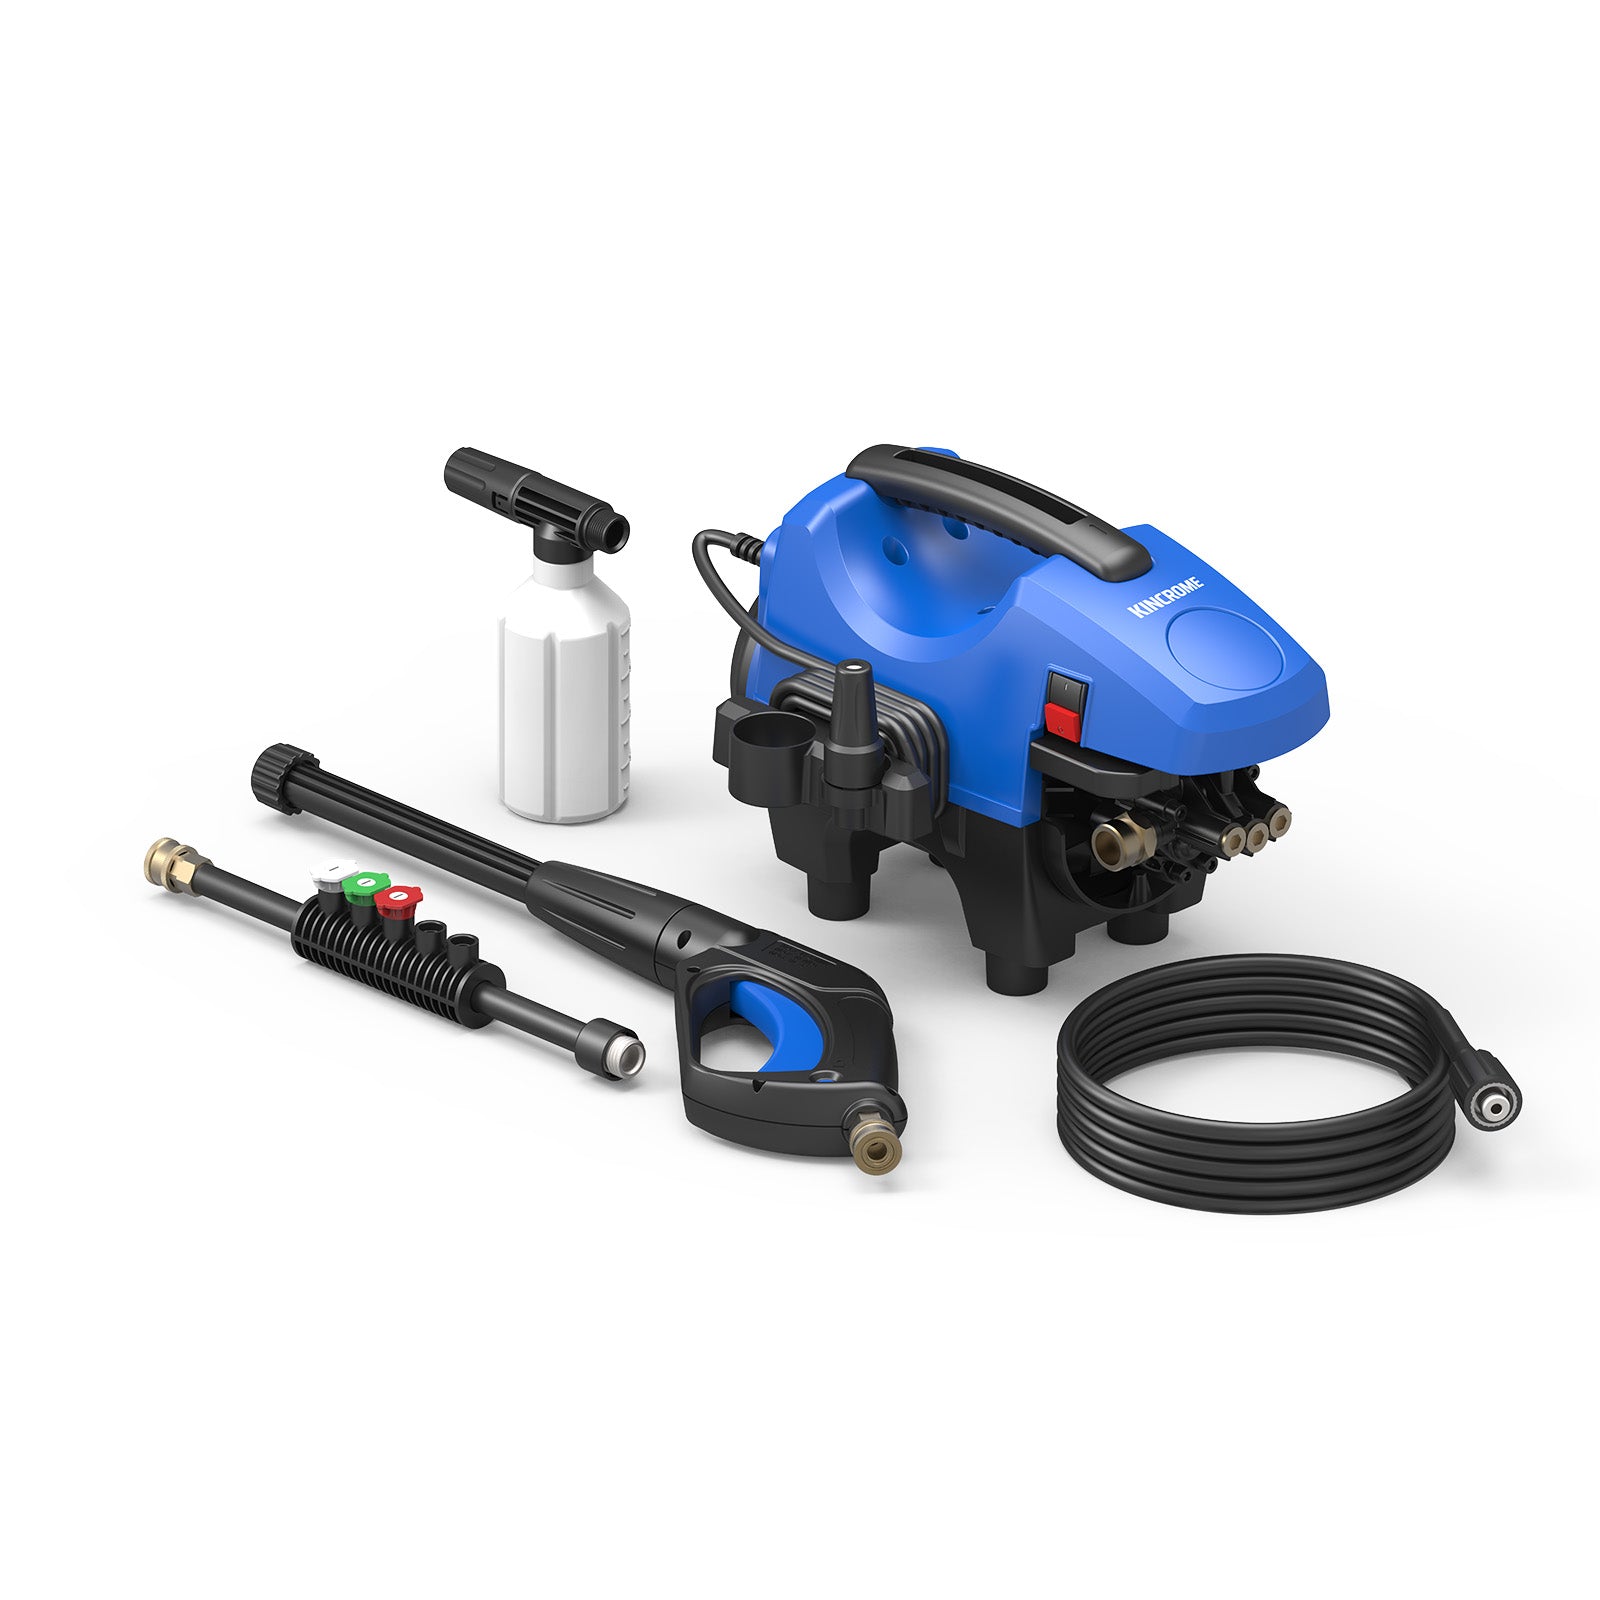 2100W Compact Electric High-Pressure Washer, 2400psi, 7.2L/min, 8m Hose K16253 by Kincrome